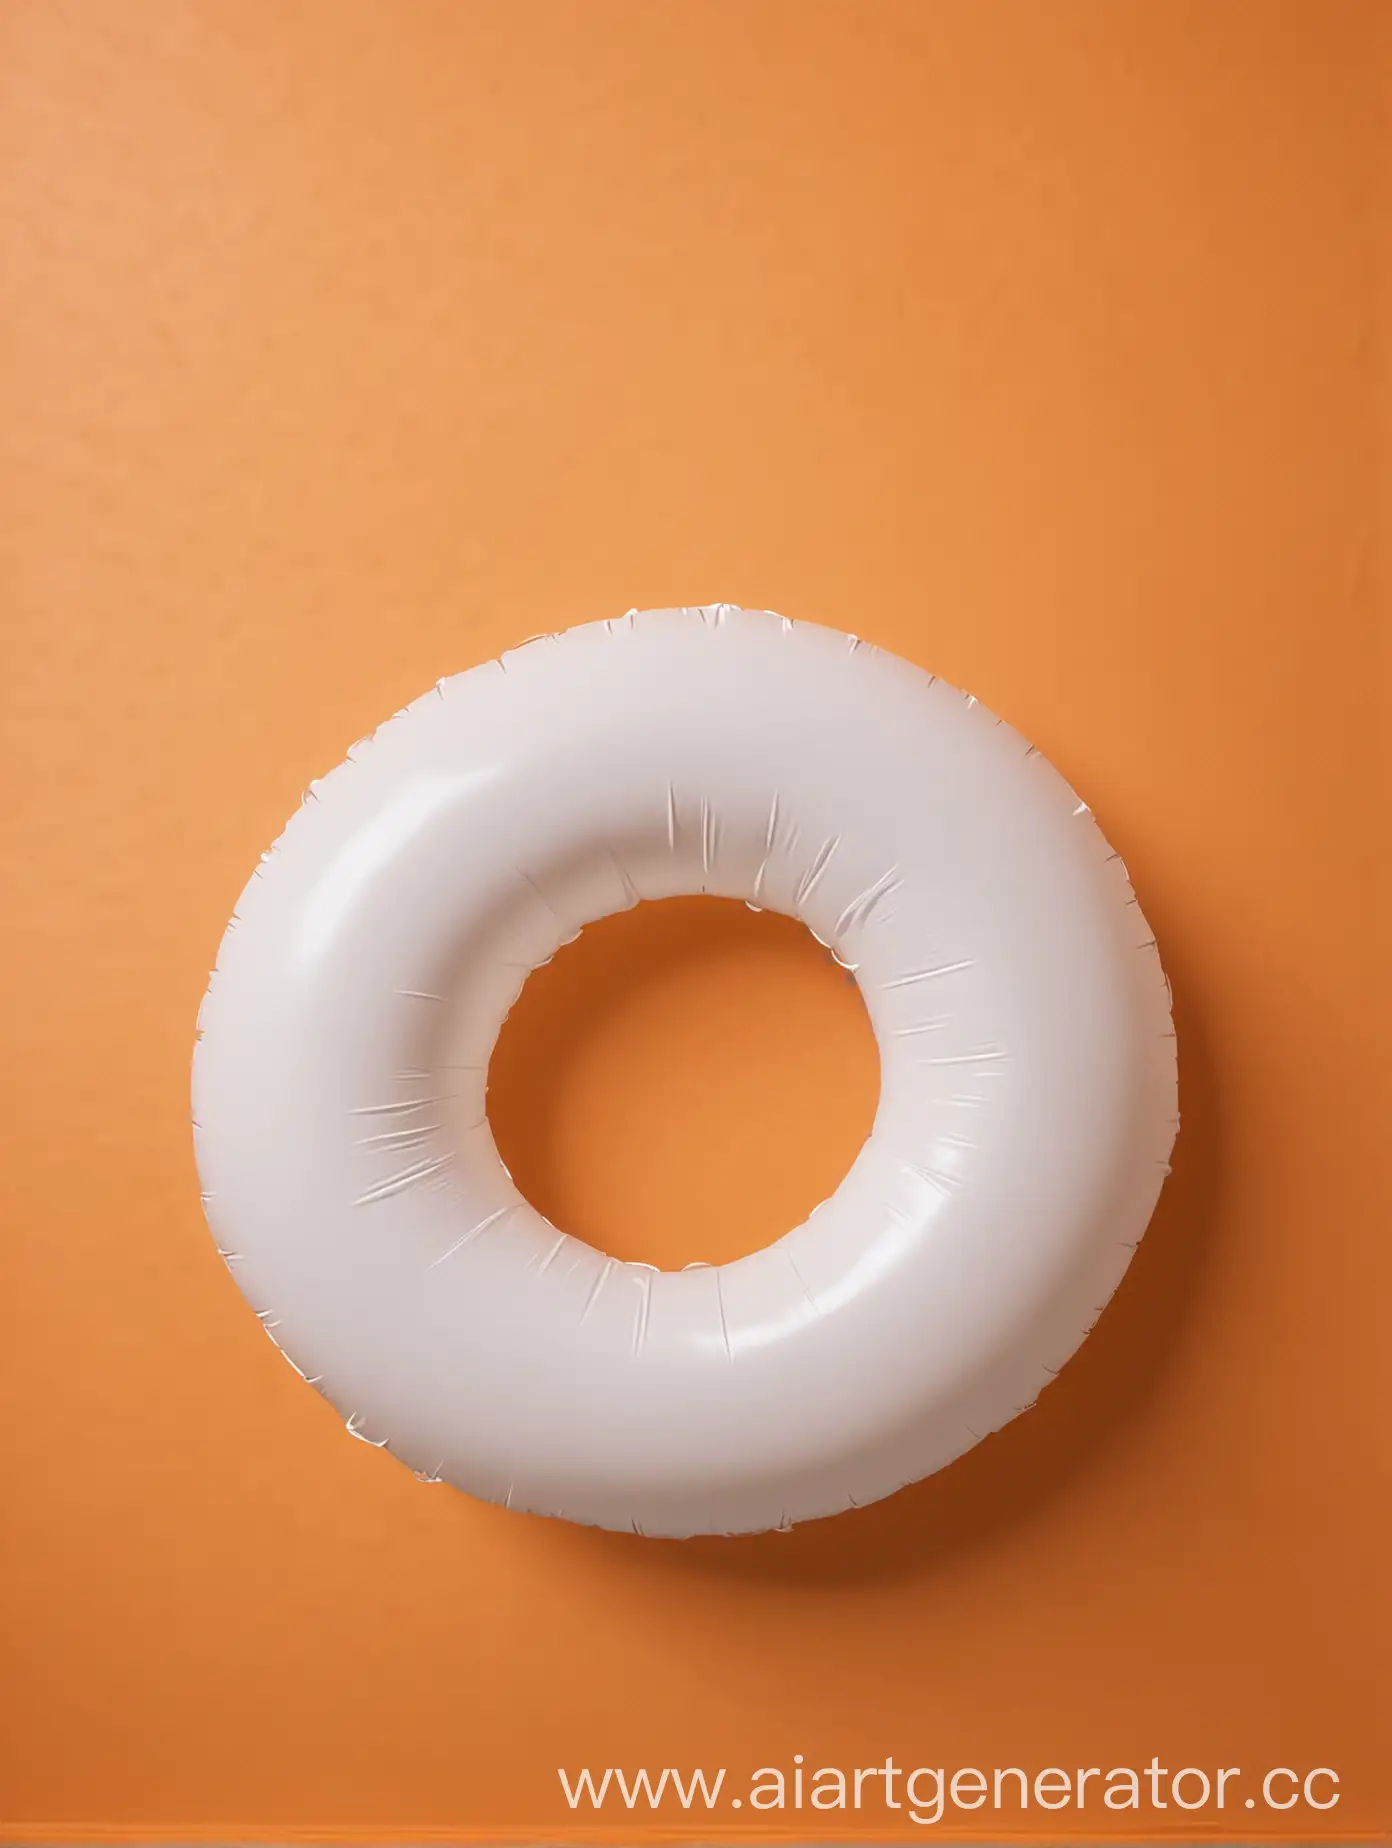 White-Inflatable-Ring-Swimming-in-Vibrant-Orange-Background